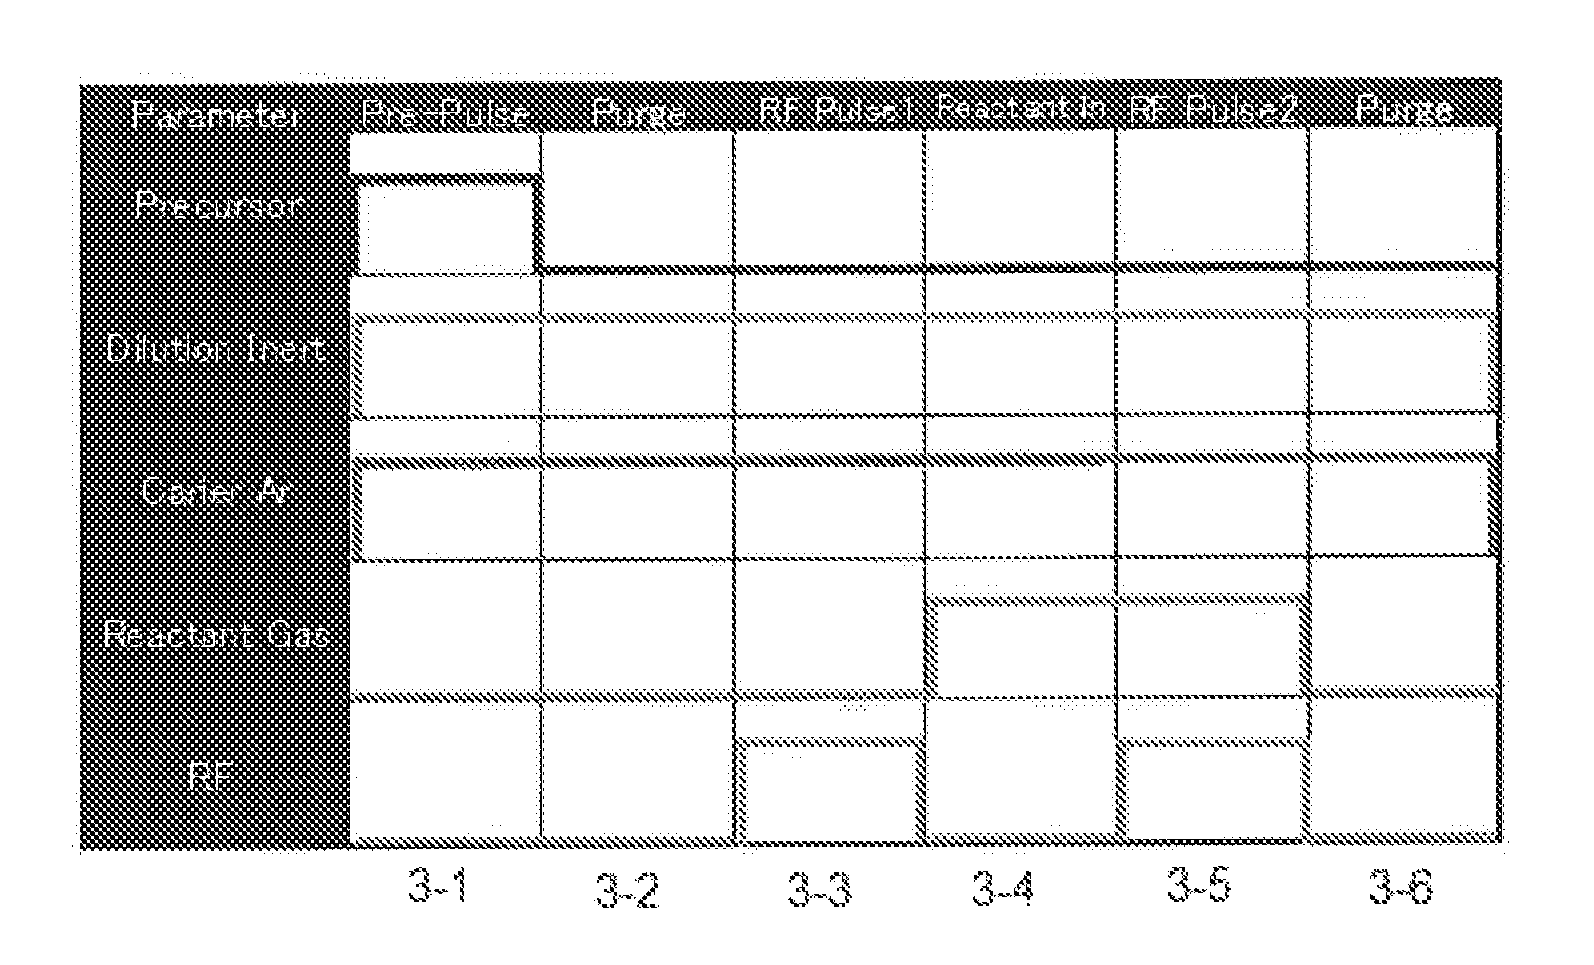 Method for Forming Insulation Film Using Non-Halide Precursor Having Four or More Silicons